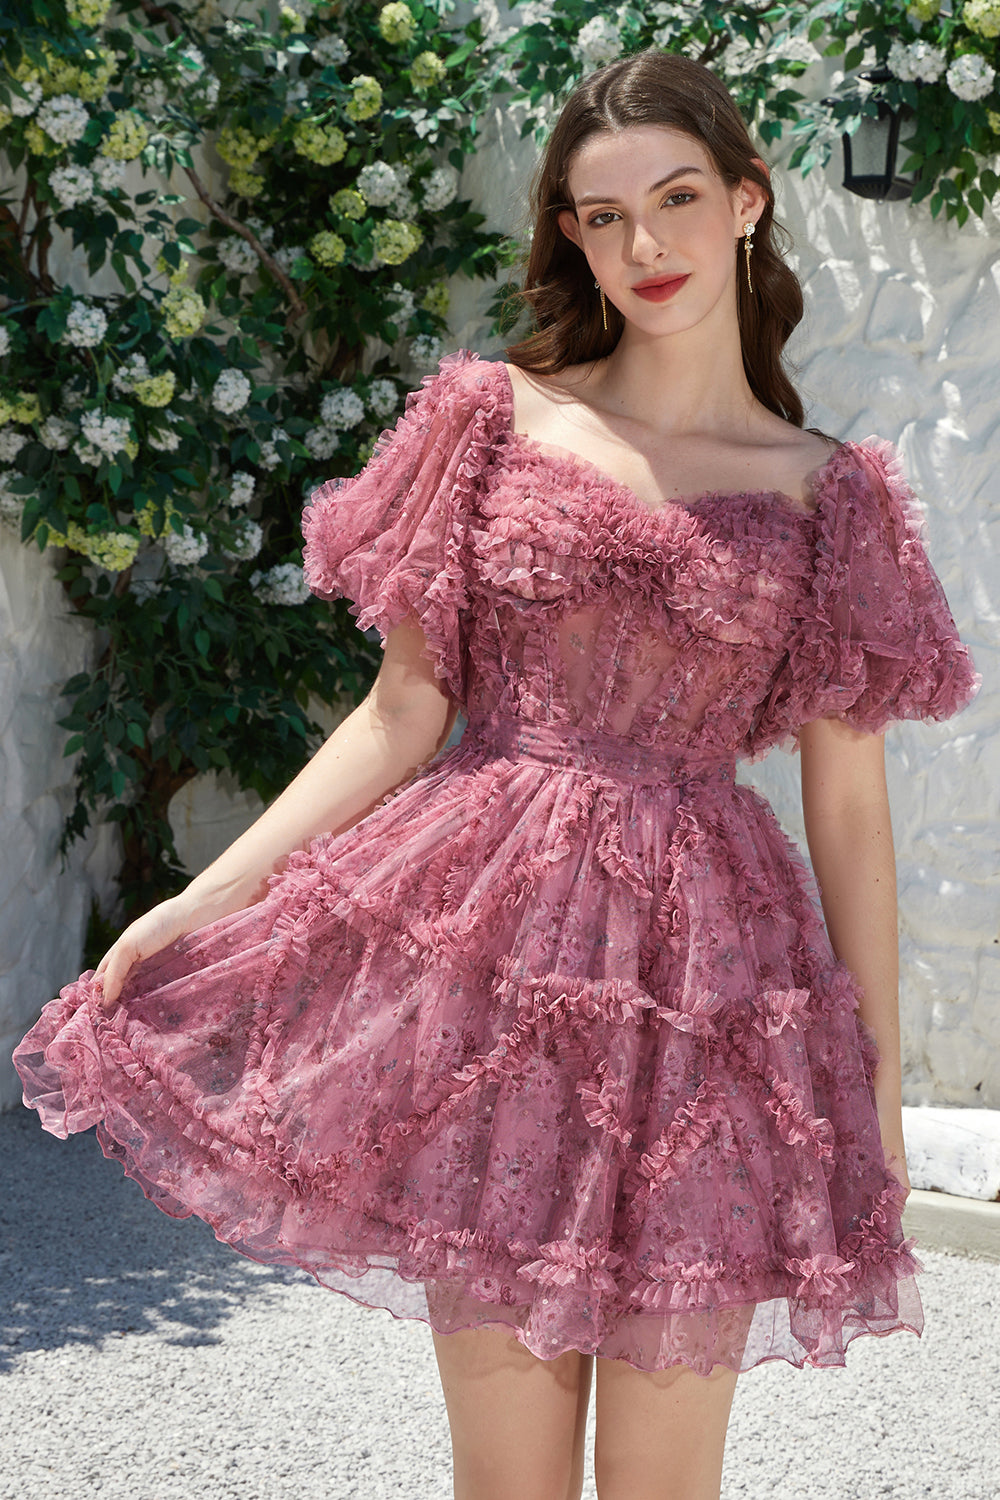 Beautiful A Line Off the Shoulder Fuchsia Tulle Short Homecoming Dress with Short Sleeves